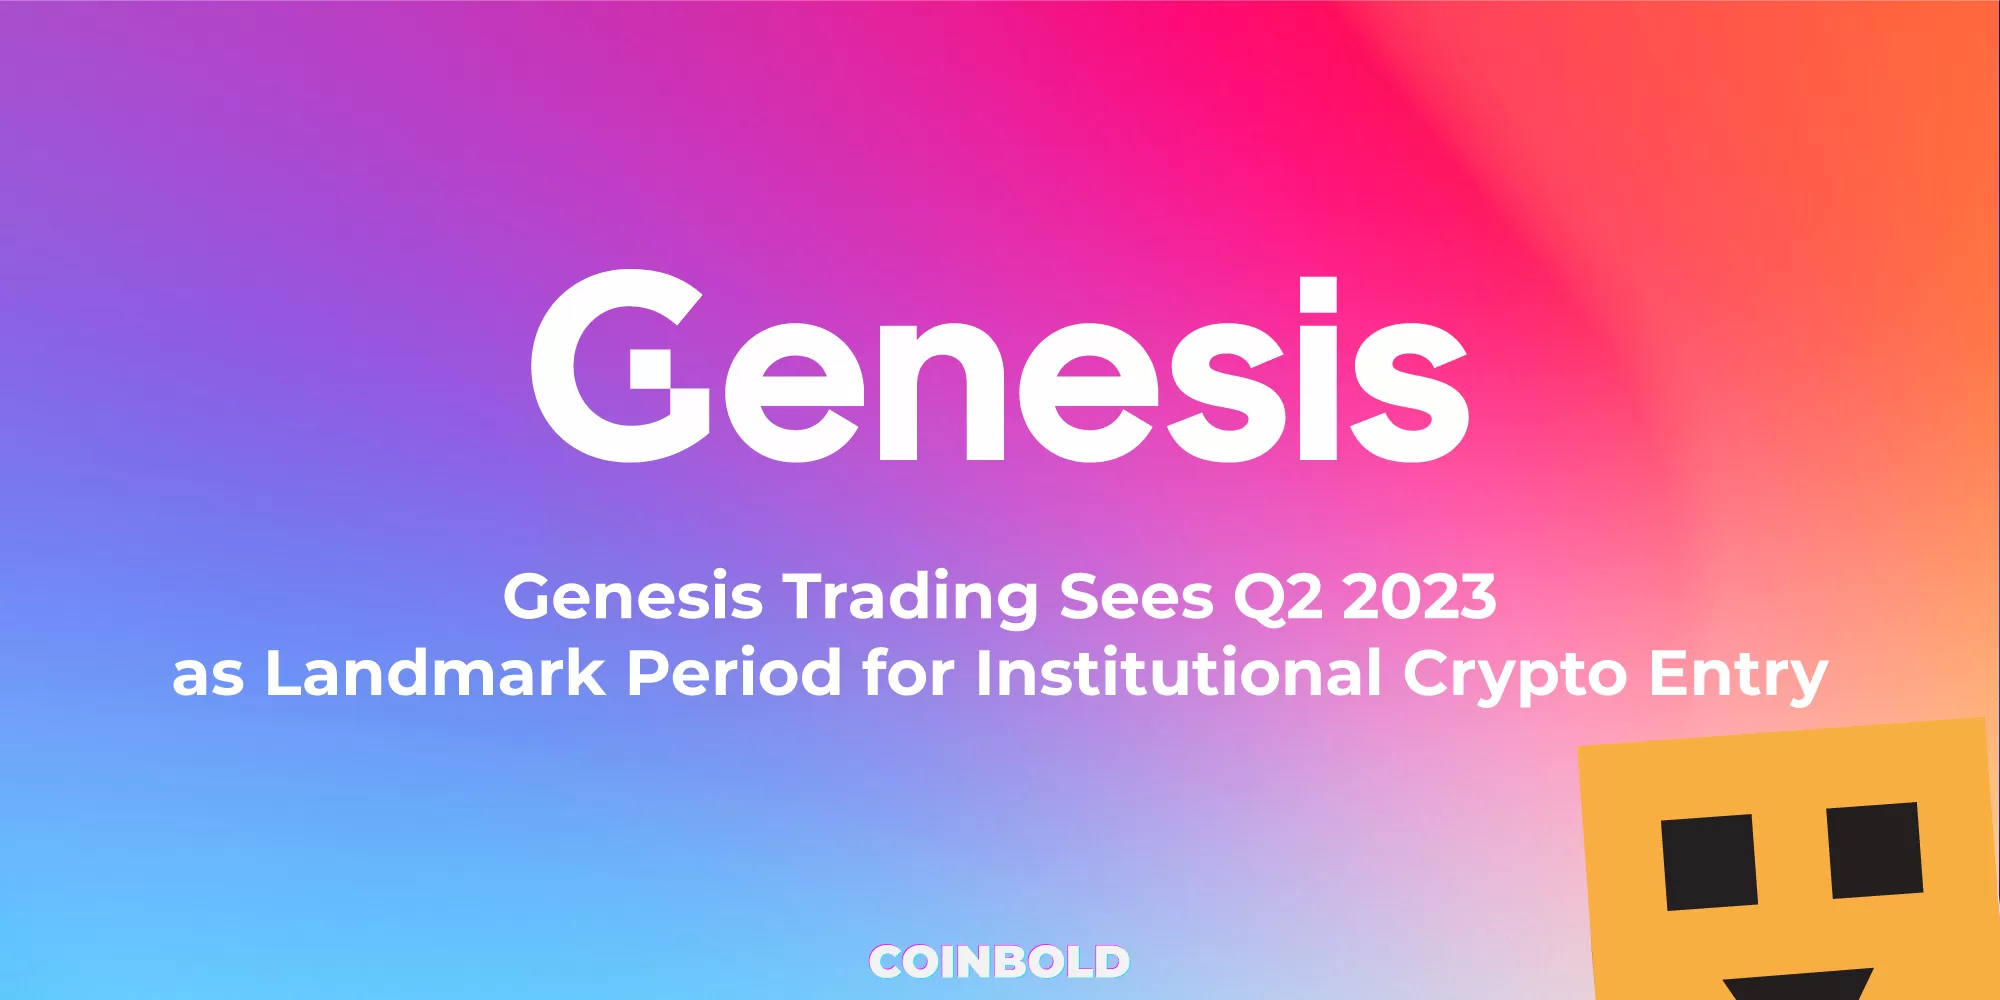 Genesis Trading Sees Q2 2023 as Landmark Period for Institutional Crypto Entry